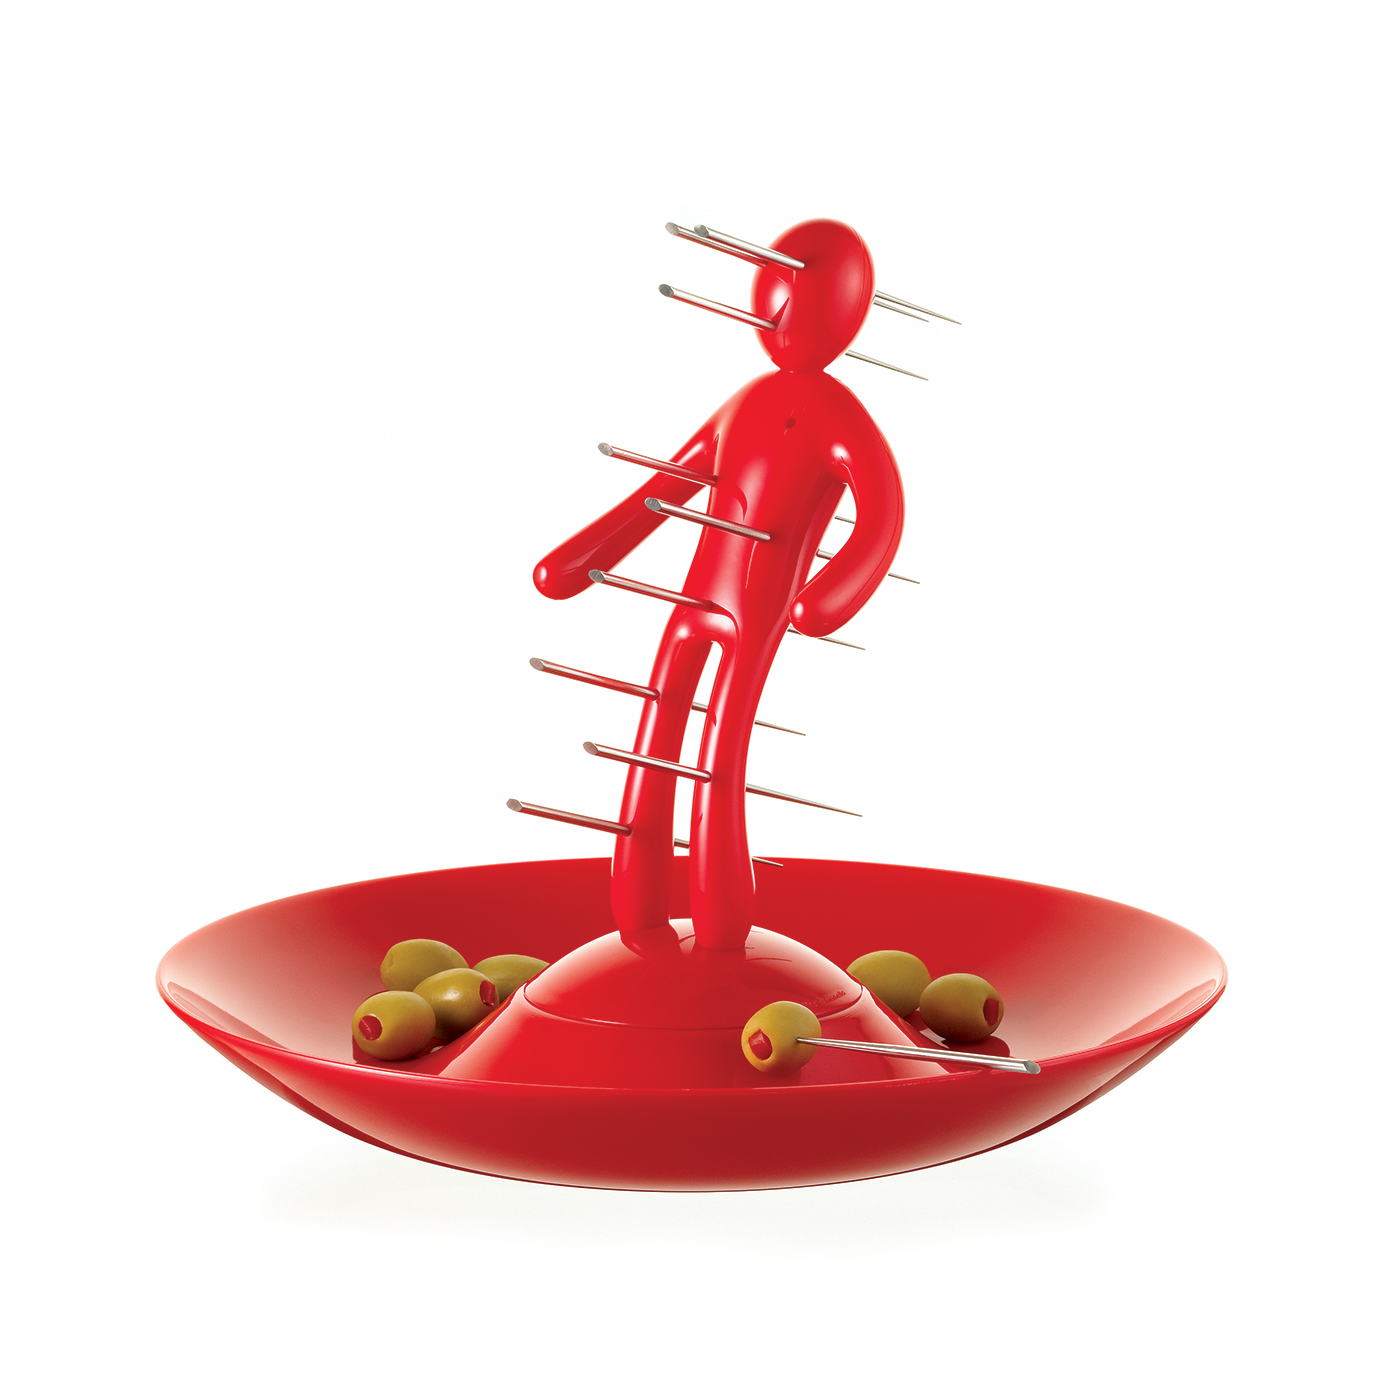 Voodoo/TheEx Aperitif Set - Red Plastic Holder and Tray